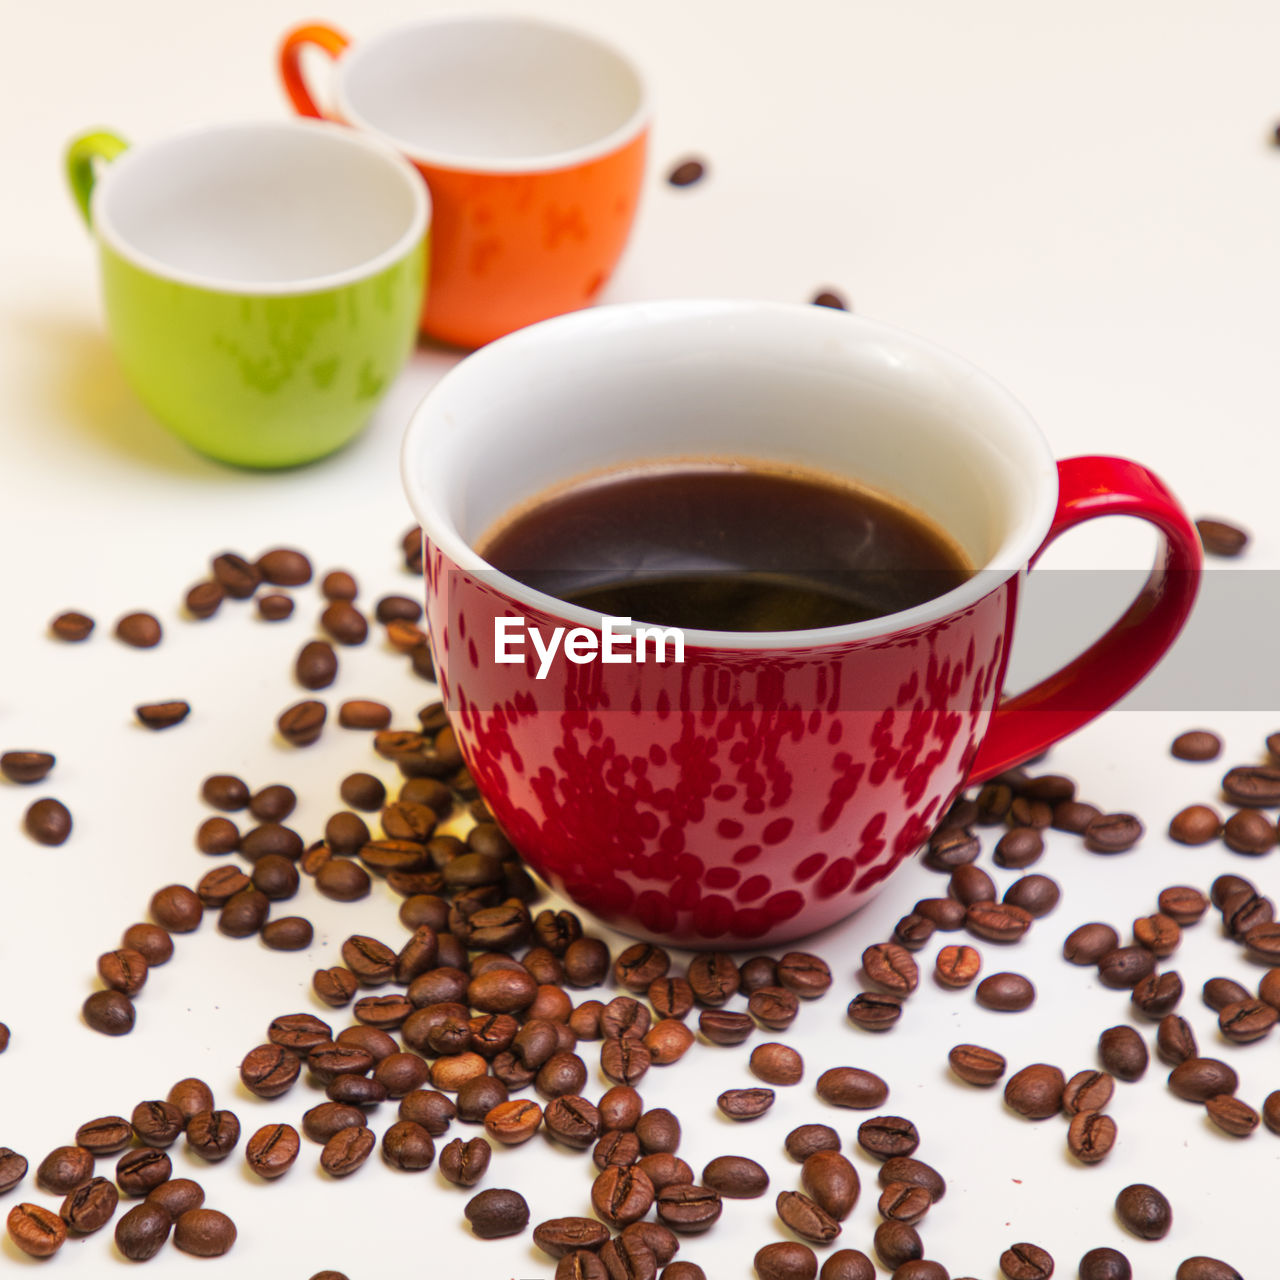 Enjoy your coffee - a close-up of coffee cup.